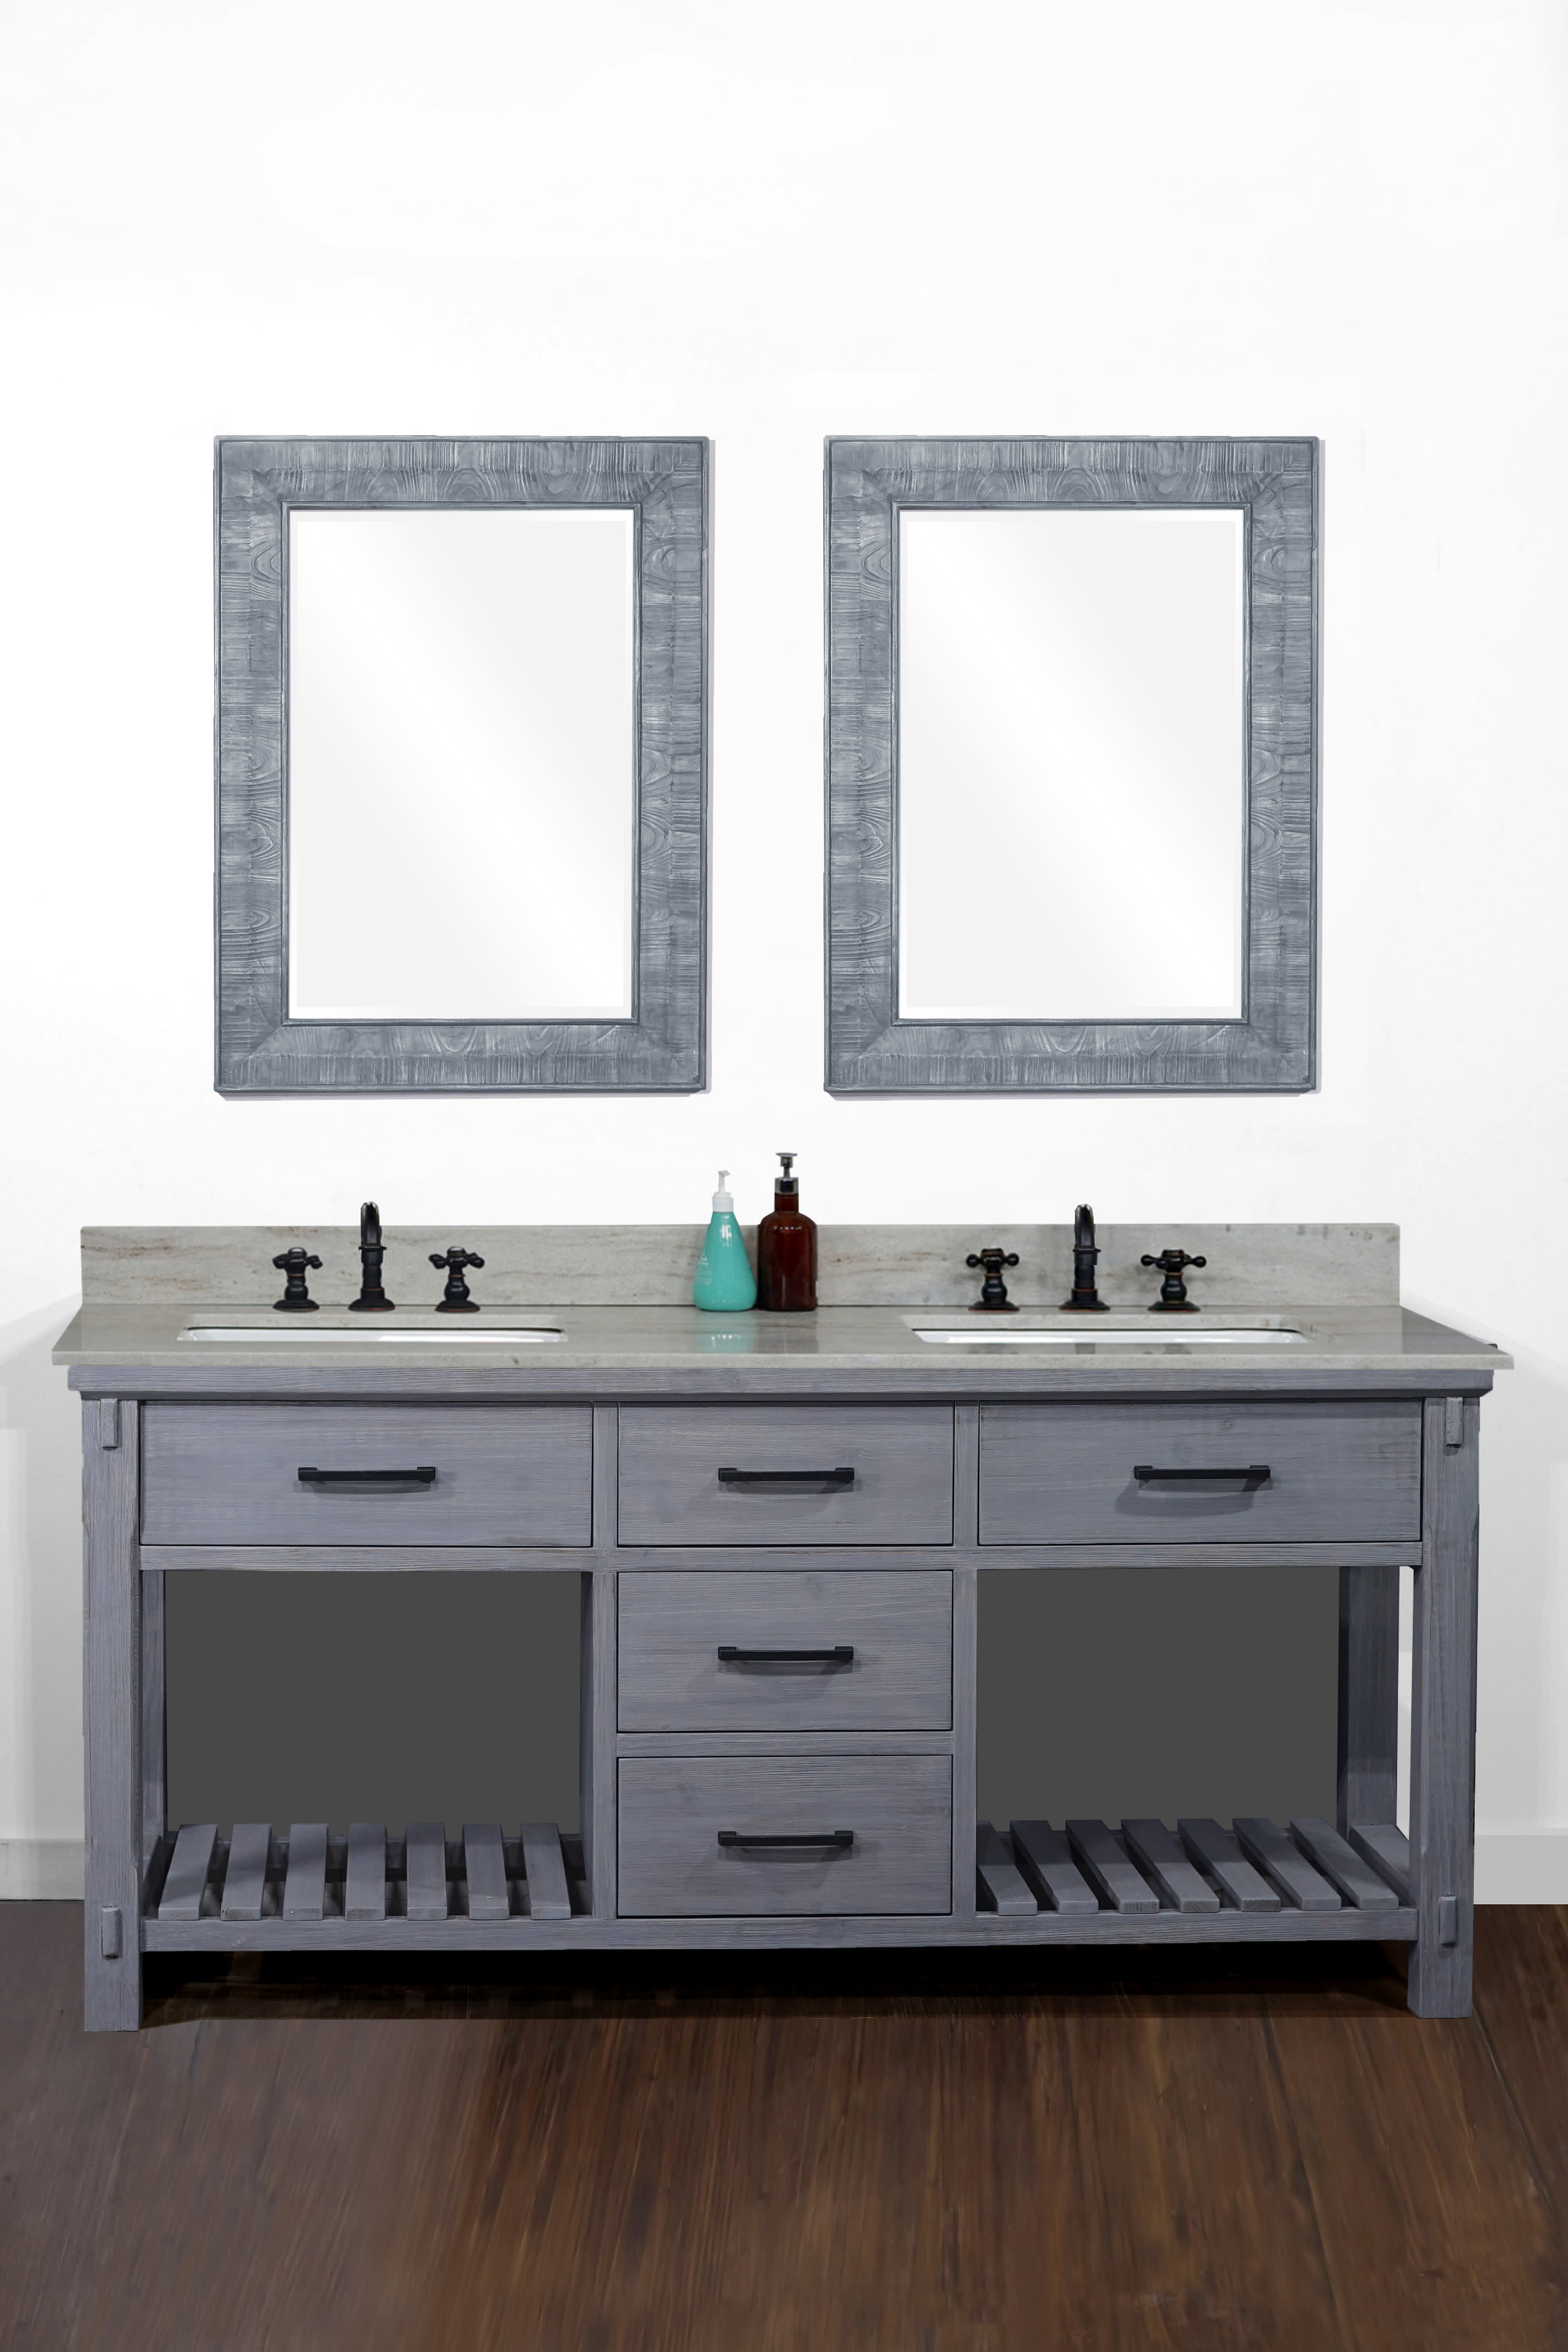 72" Rustic Solid Fir Double Sink Vanity in Blue Grey Driftwood - No Faucet with Countertop Options